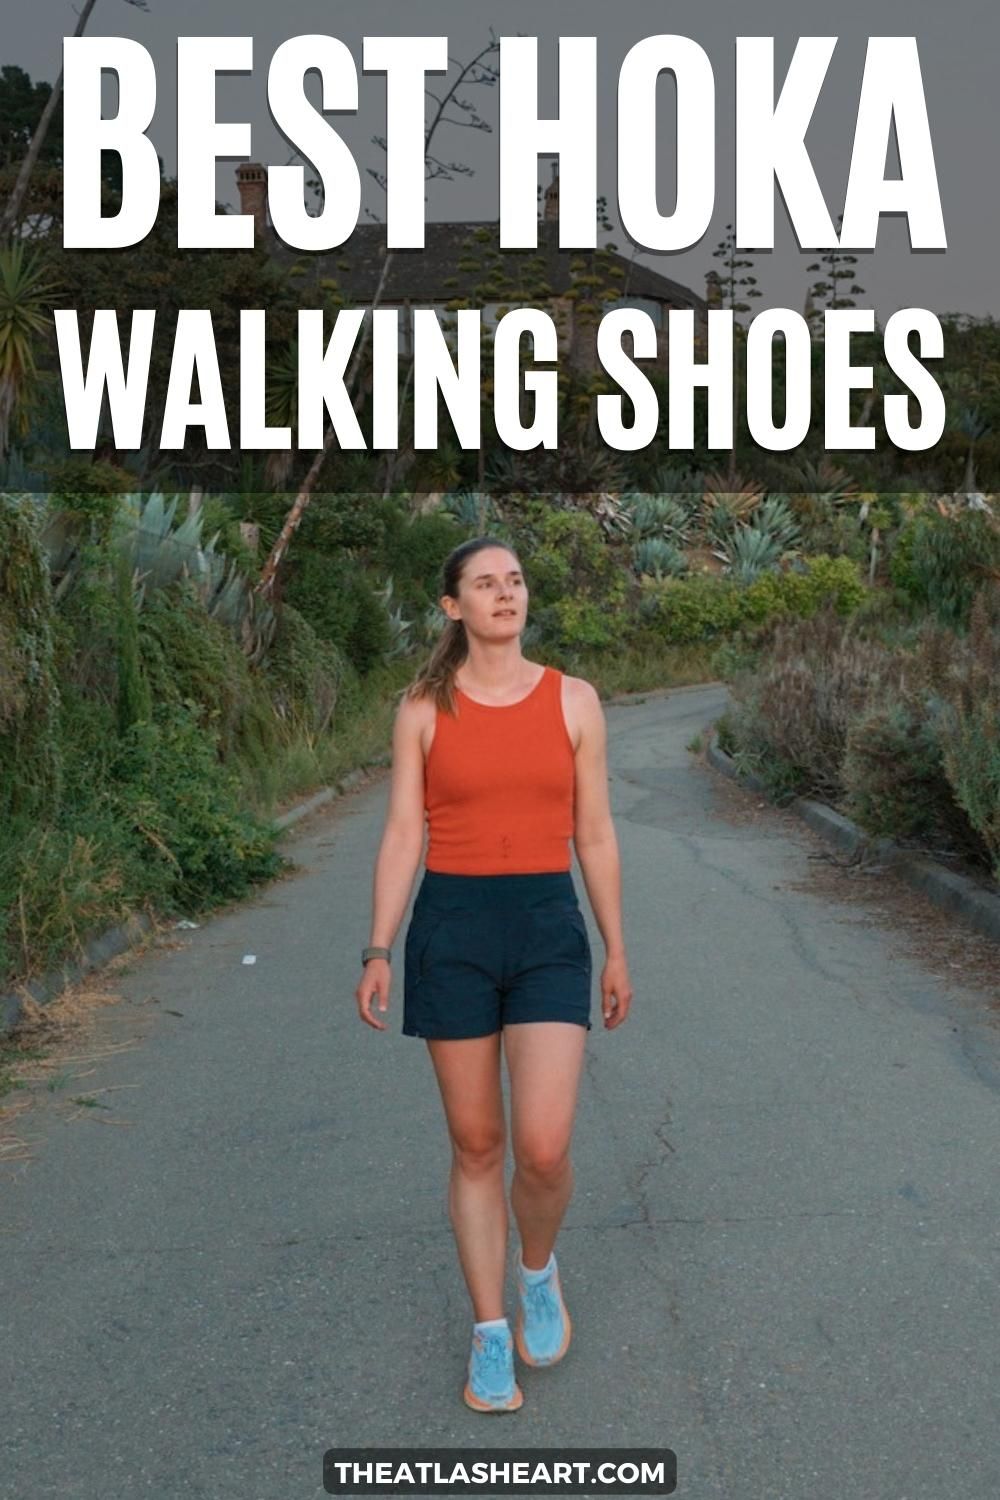 A young woman wearing light blue Hoka walking shoes, an orange tank top, and navy shorts walks towards the camera on a paved path lined by succulents and bushes, with the text overlay, "Best Hoka Walking Shoe."